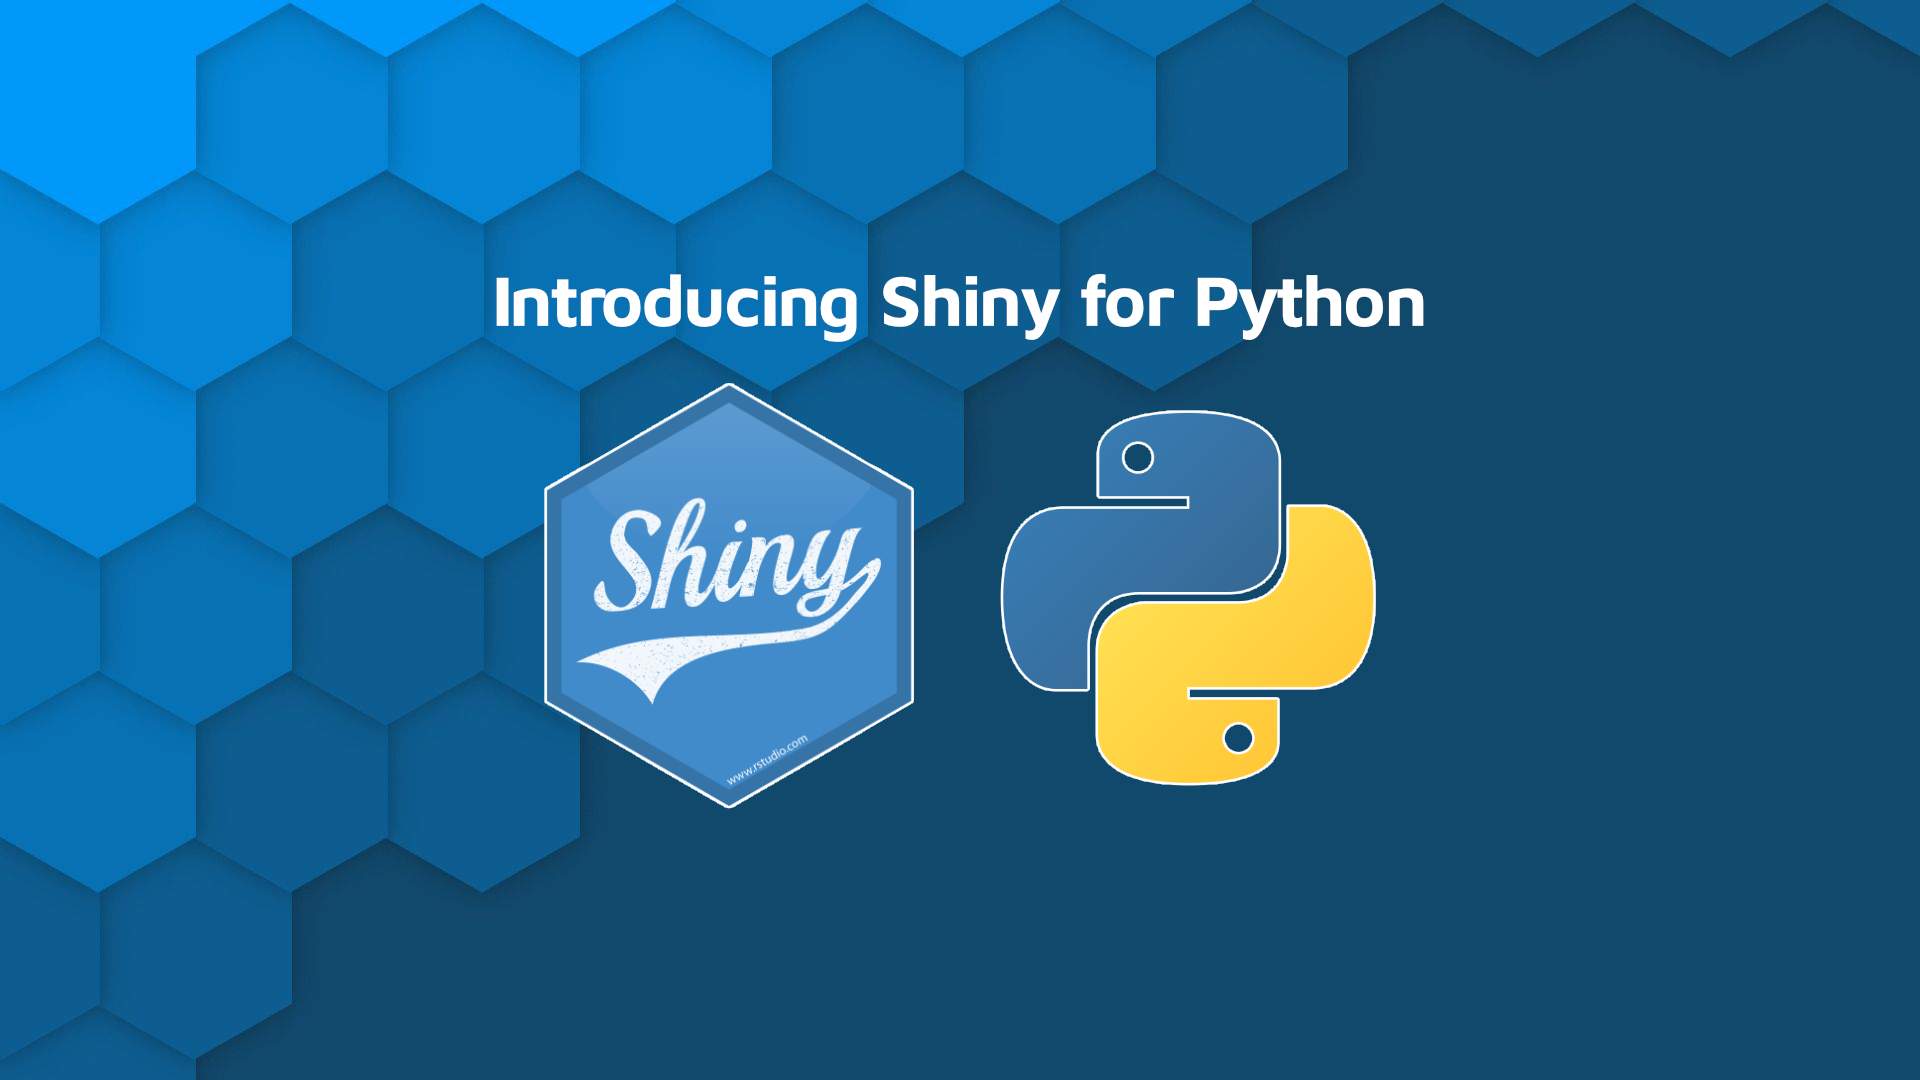 Shiny for Python Introduction Article Thumbnail